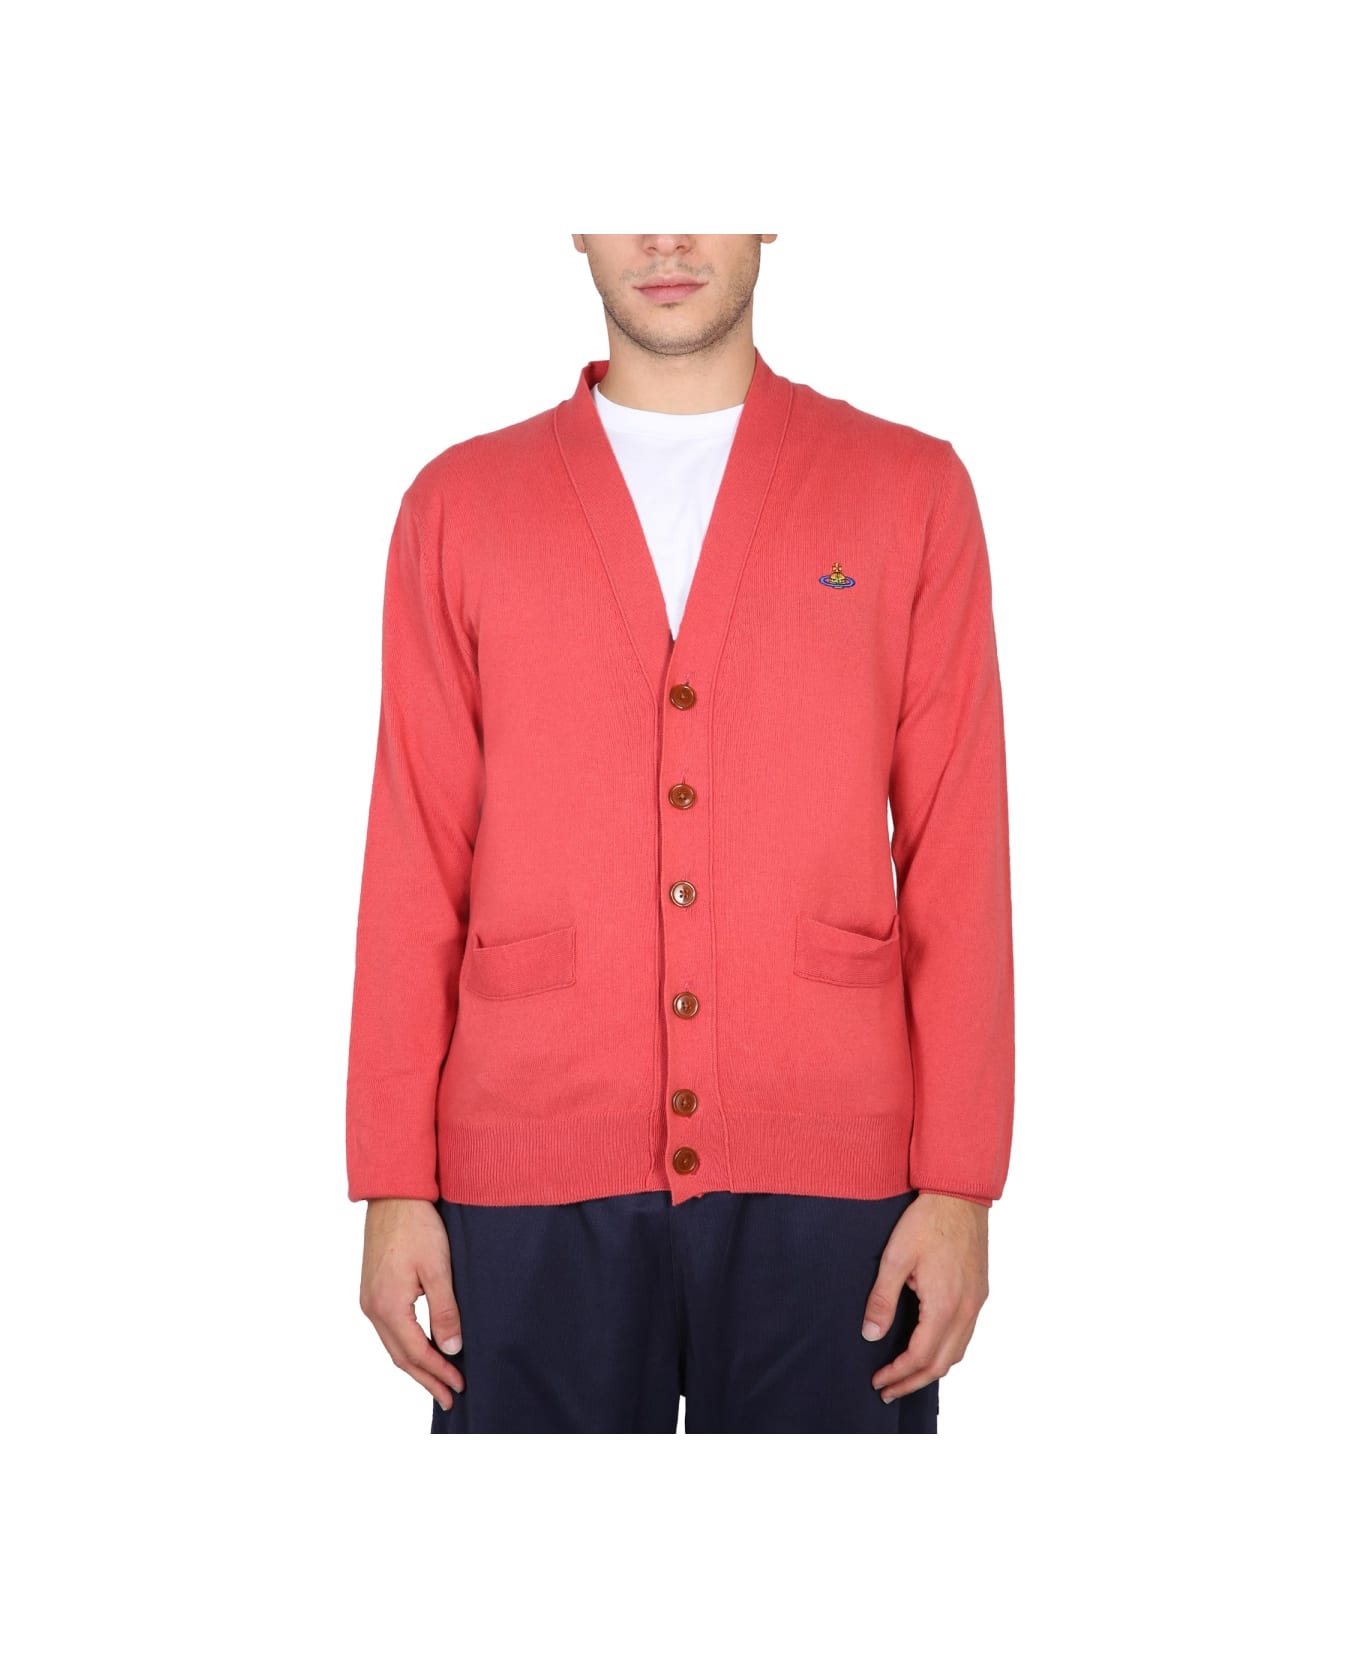 Vivienne Westwood Cardigan With Orb Embroidery - RED